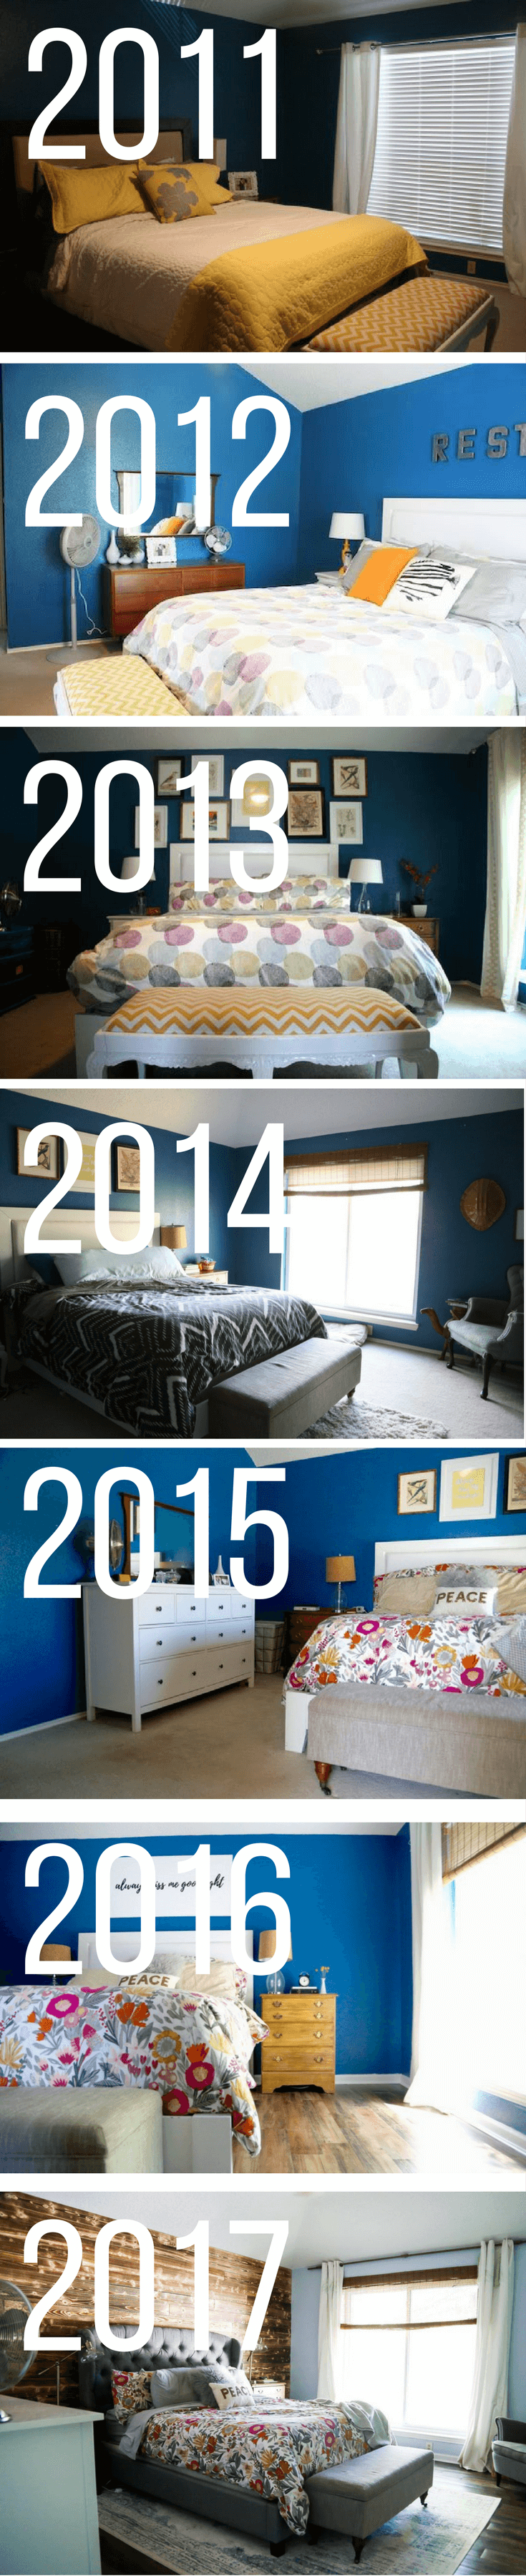 A master bedroom renovation throughout the years - before and after photos of a DIY master bedroom renovation